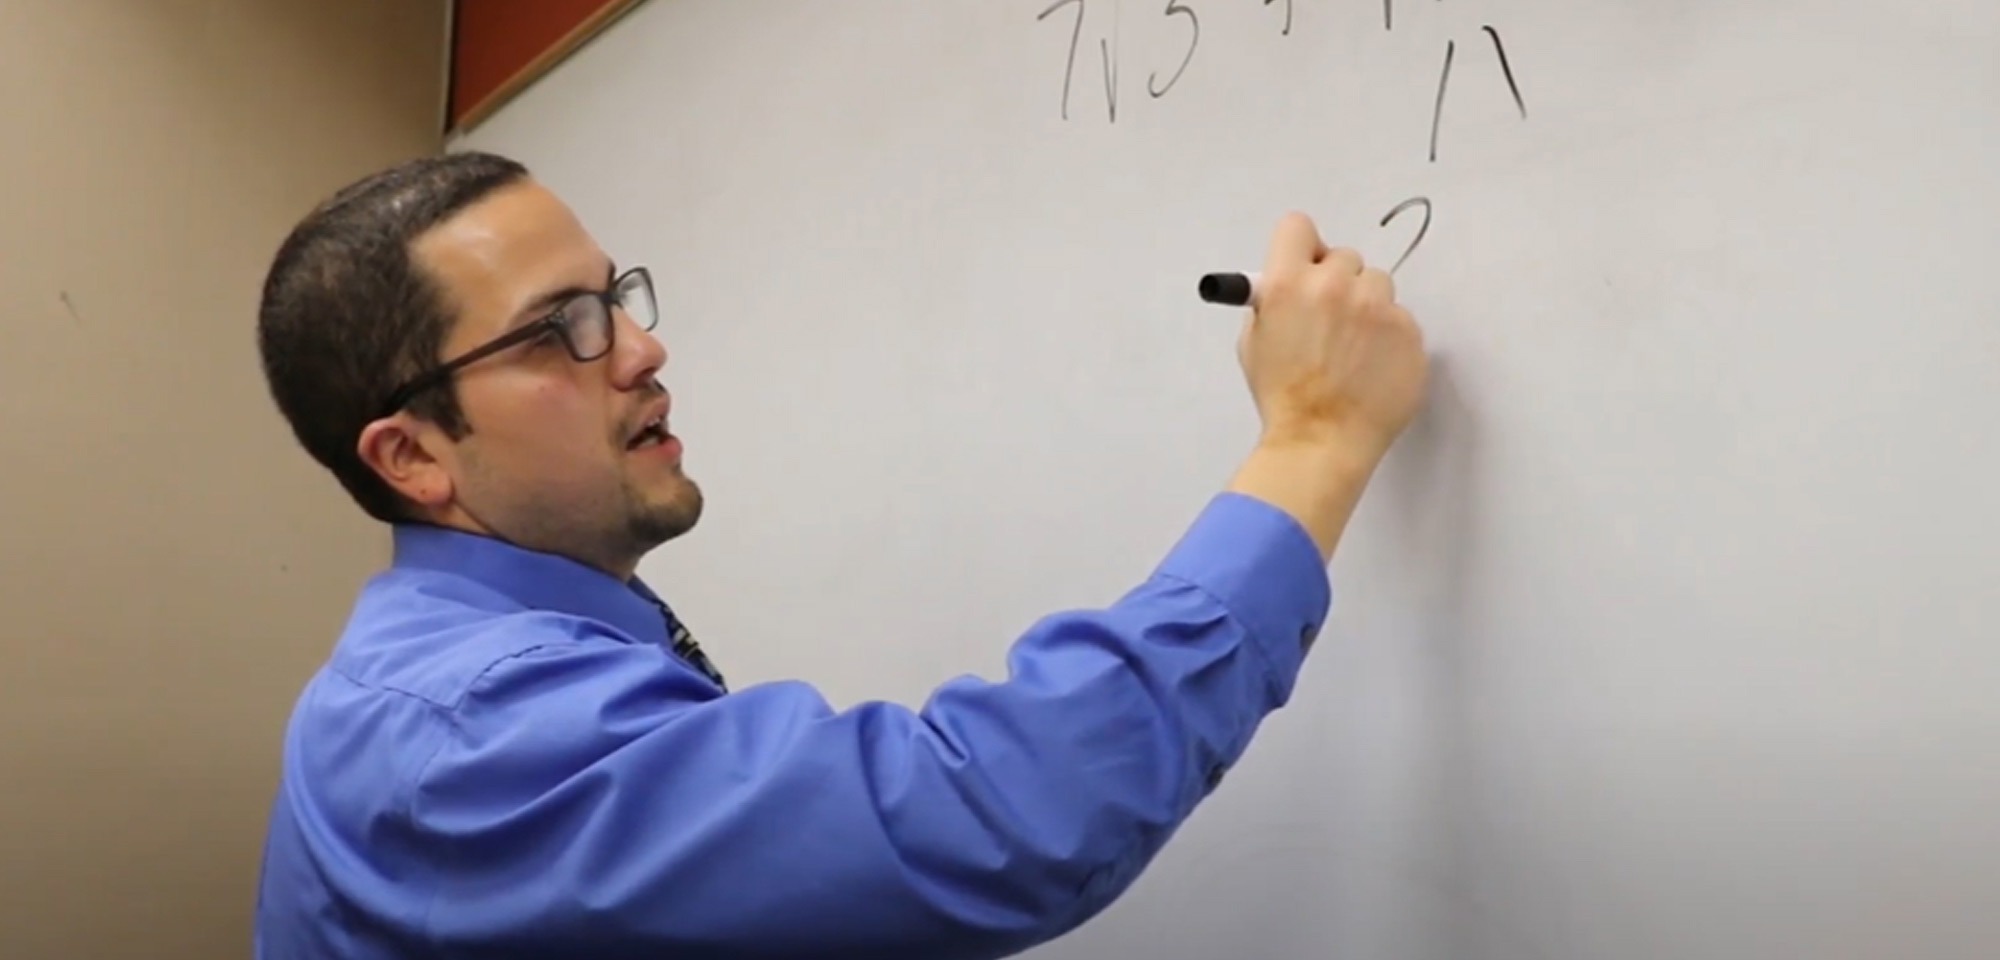 math instructor writing an equation on the white board